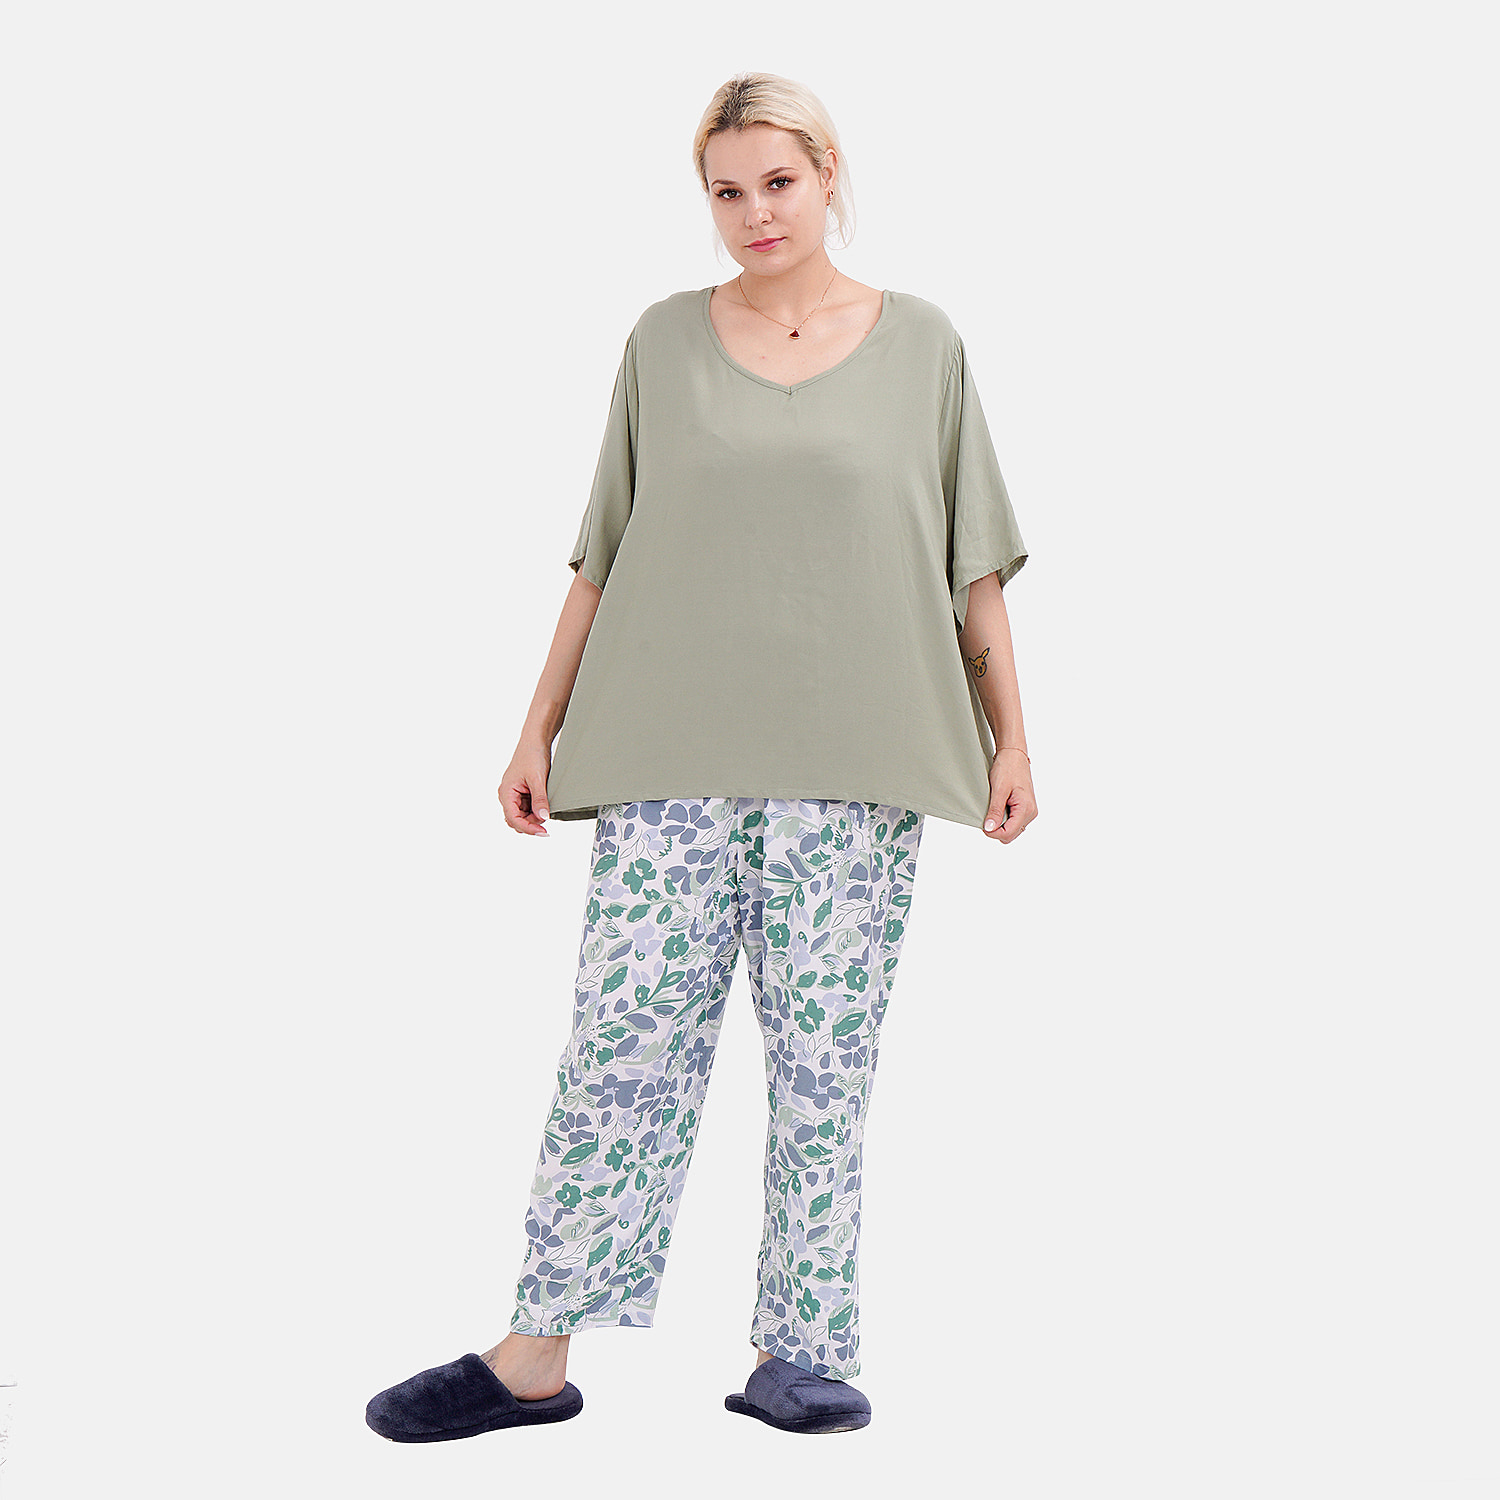 LA MAREY Loungewear Sets (Short Sleeves Top with Printed Trousers)  - Green (Size XL)